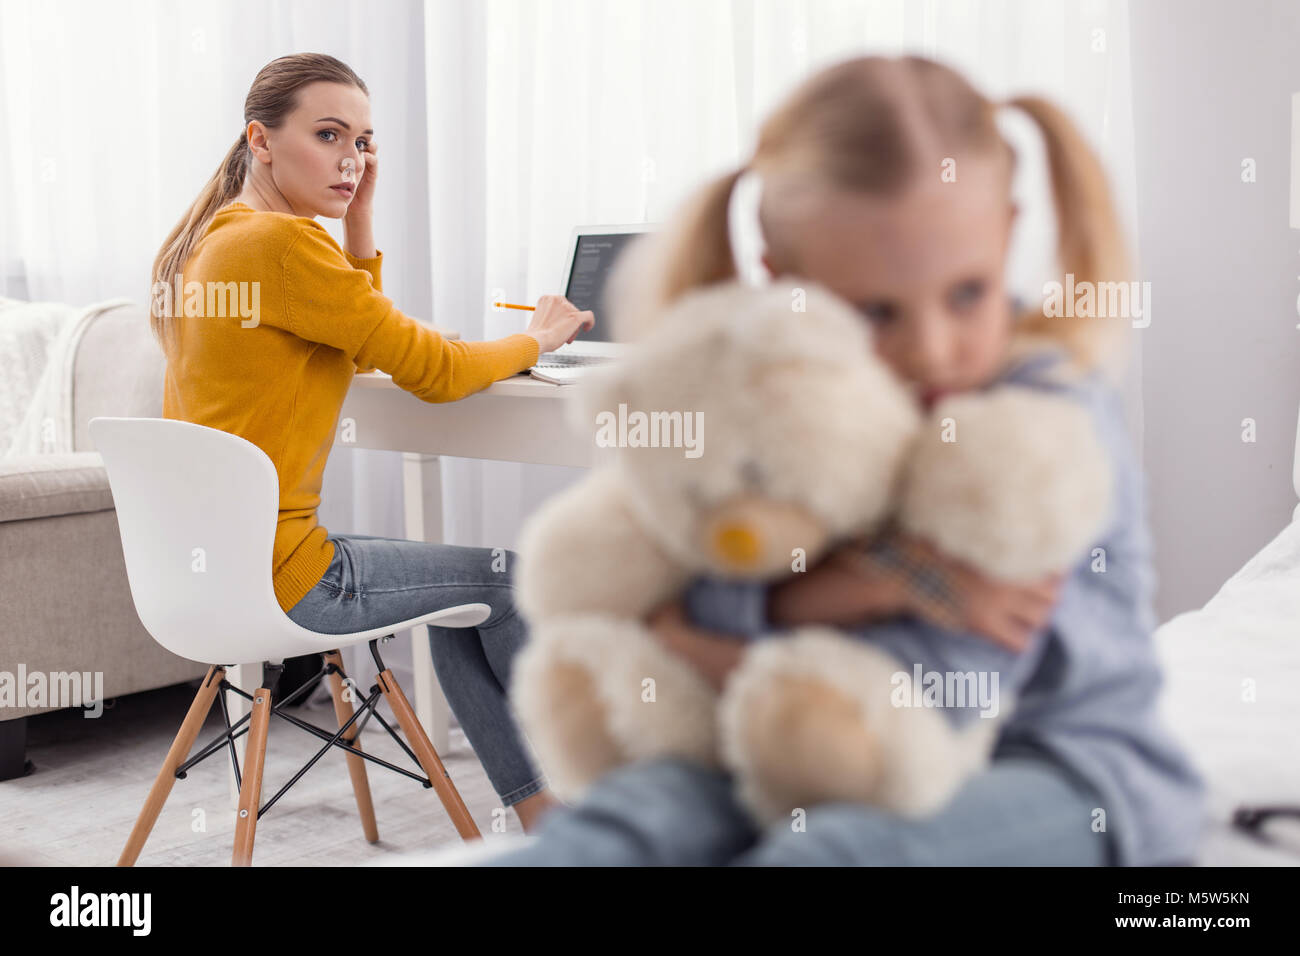 Worried single mom having problem with daughter Stock Photo